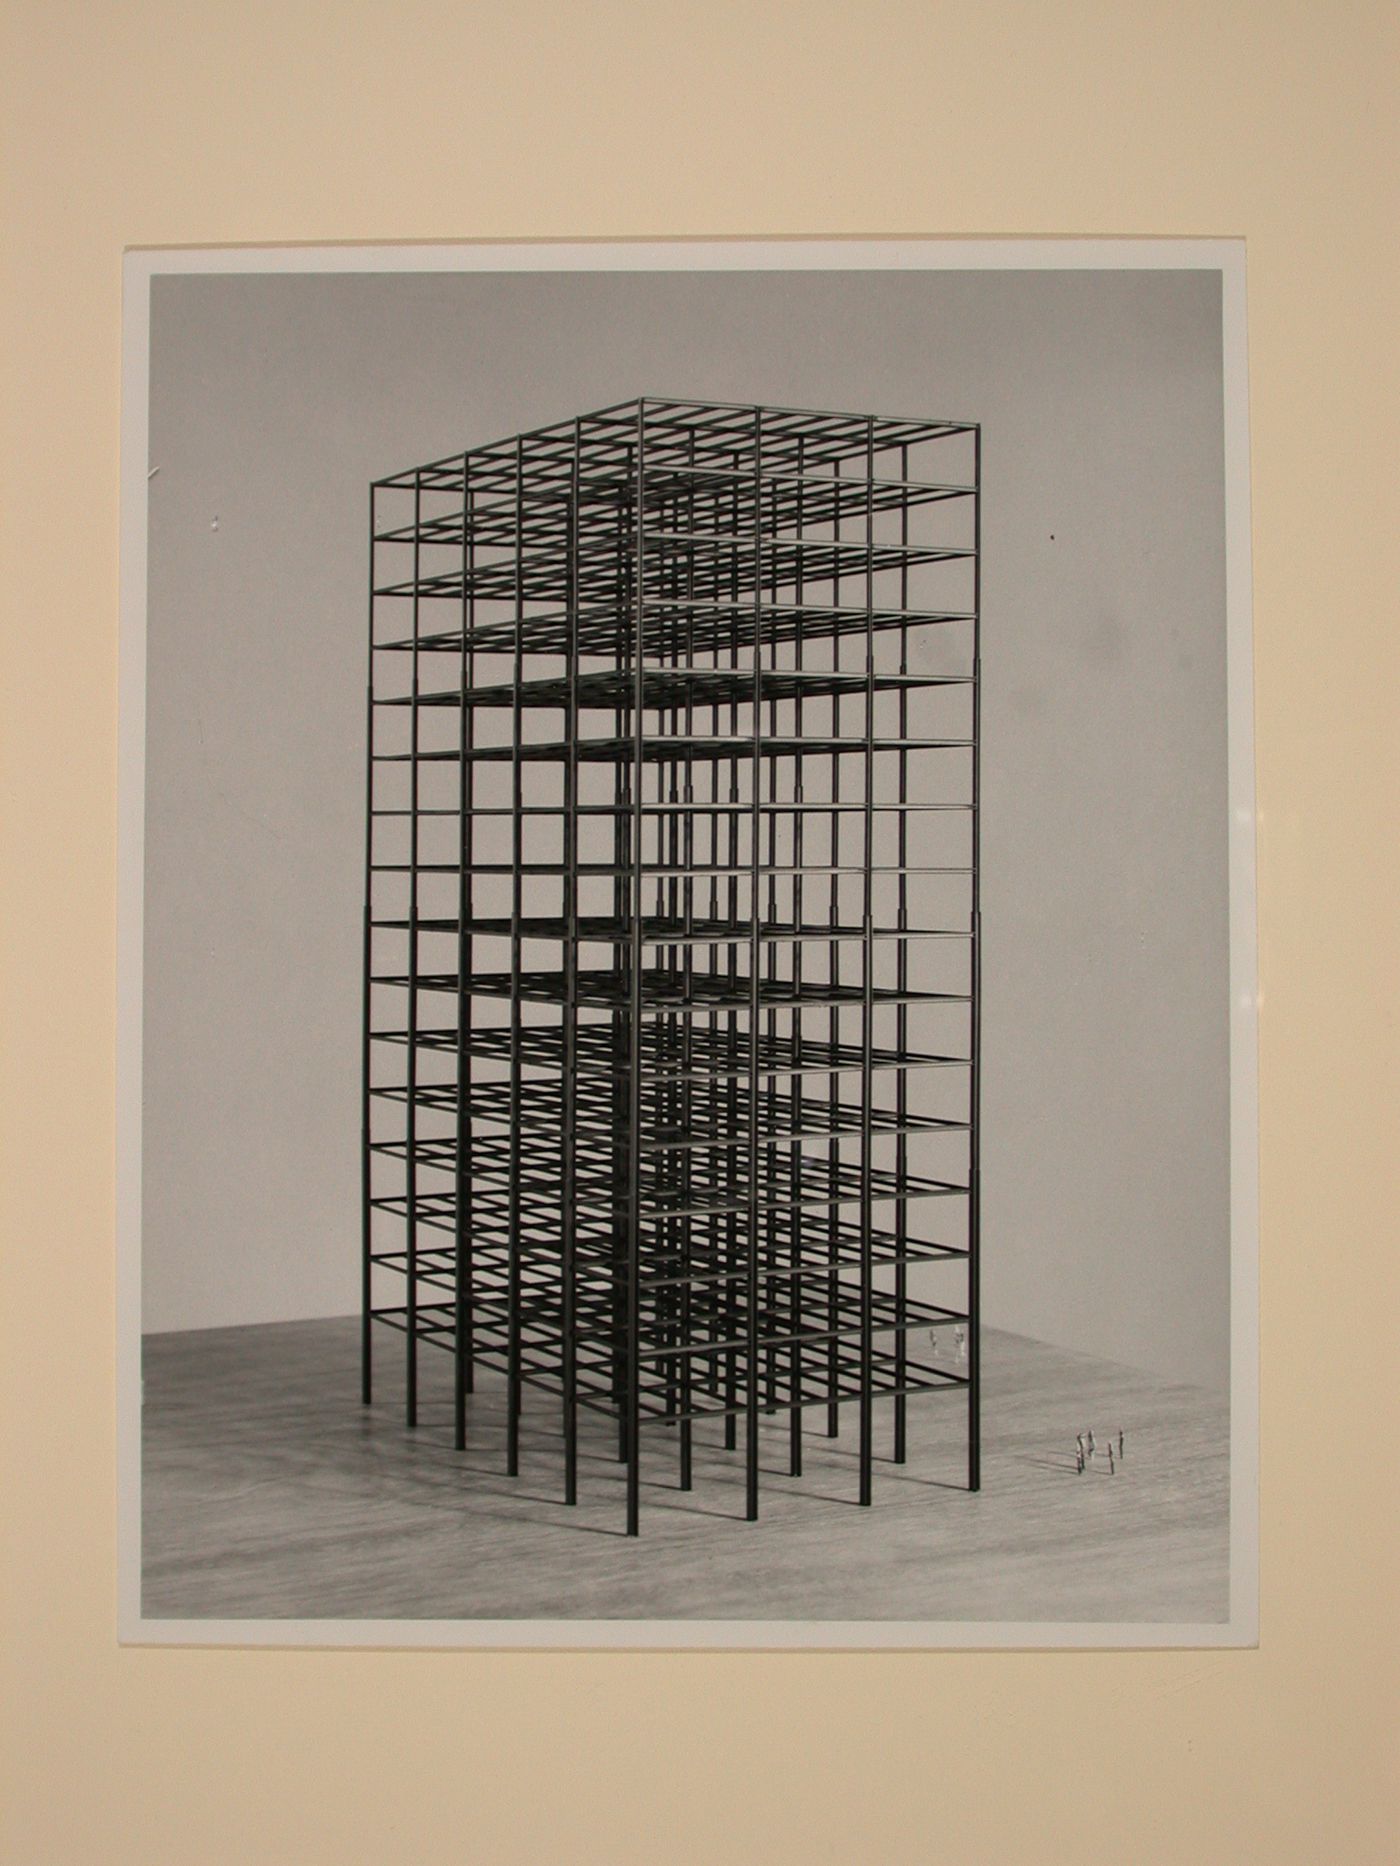 Photograph of a student [?] model for a building with steel structural framework, Sequence of Tall Buildings